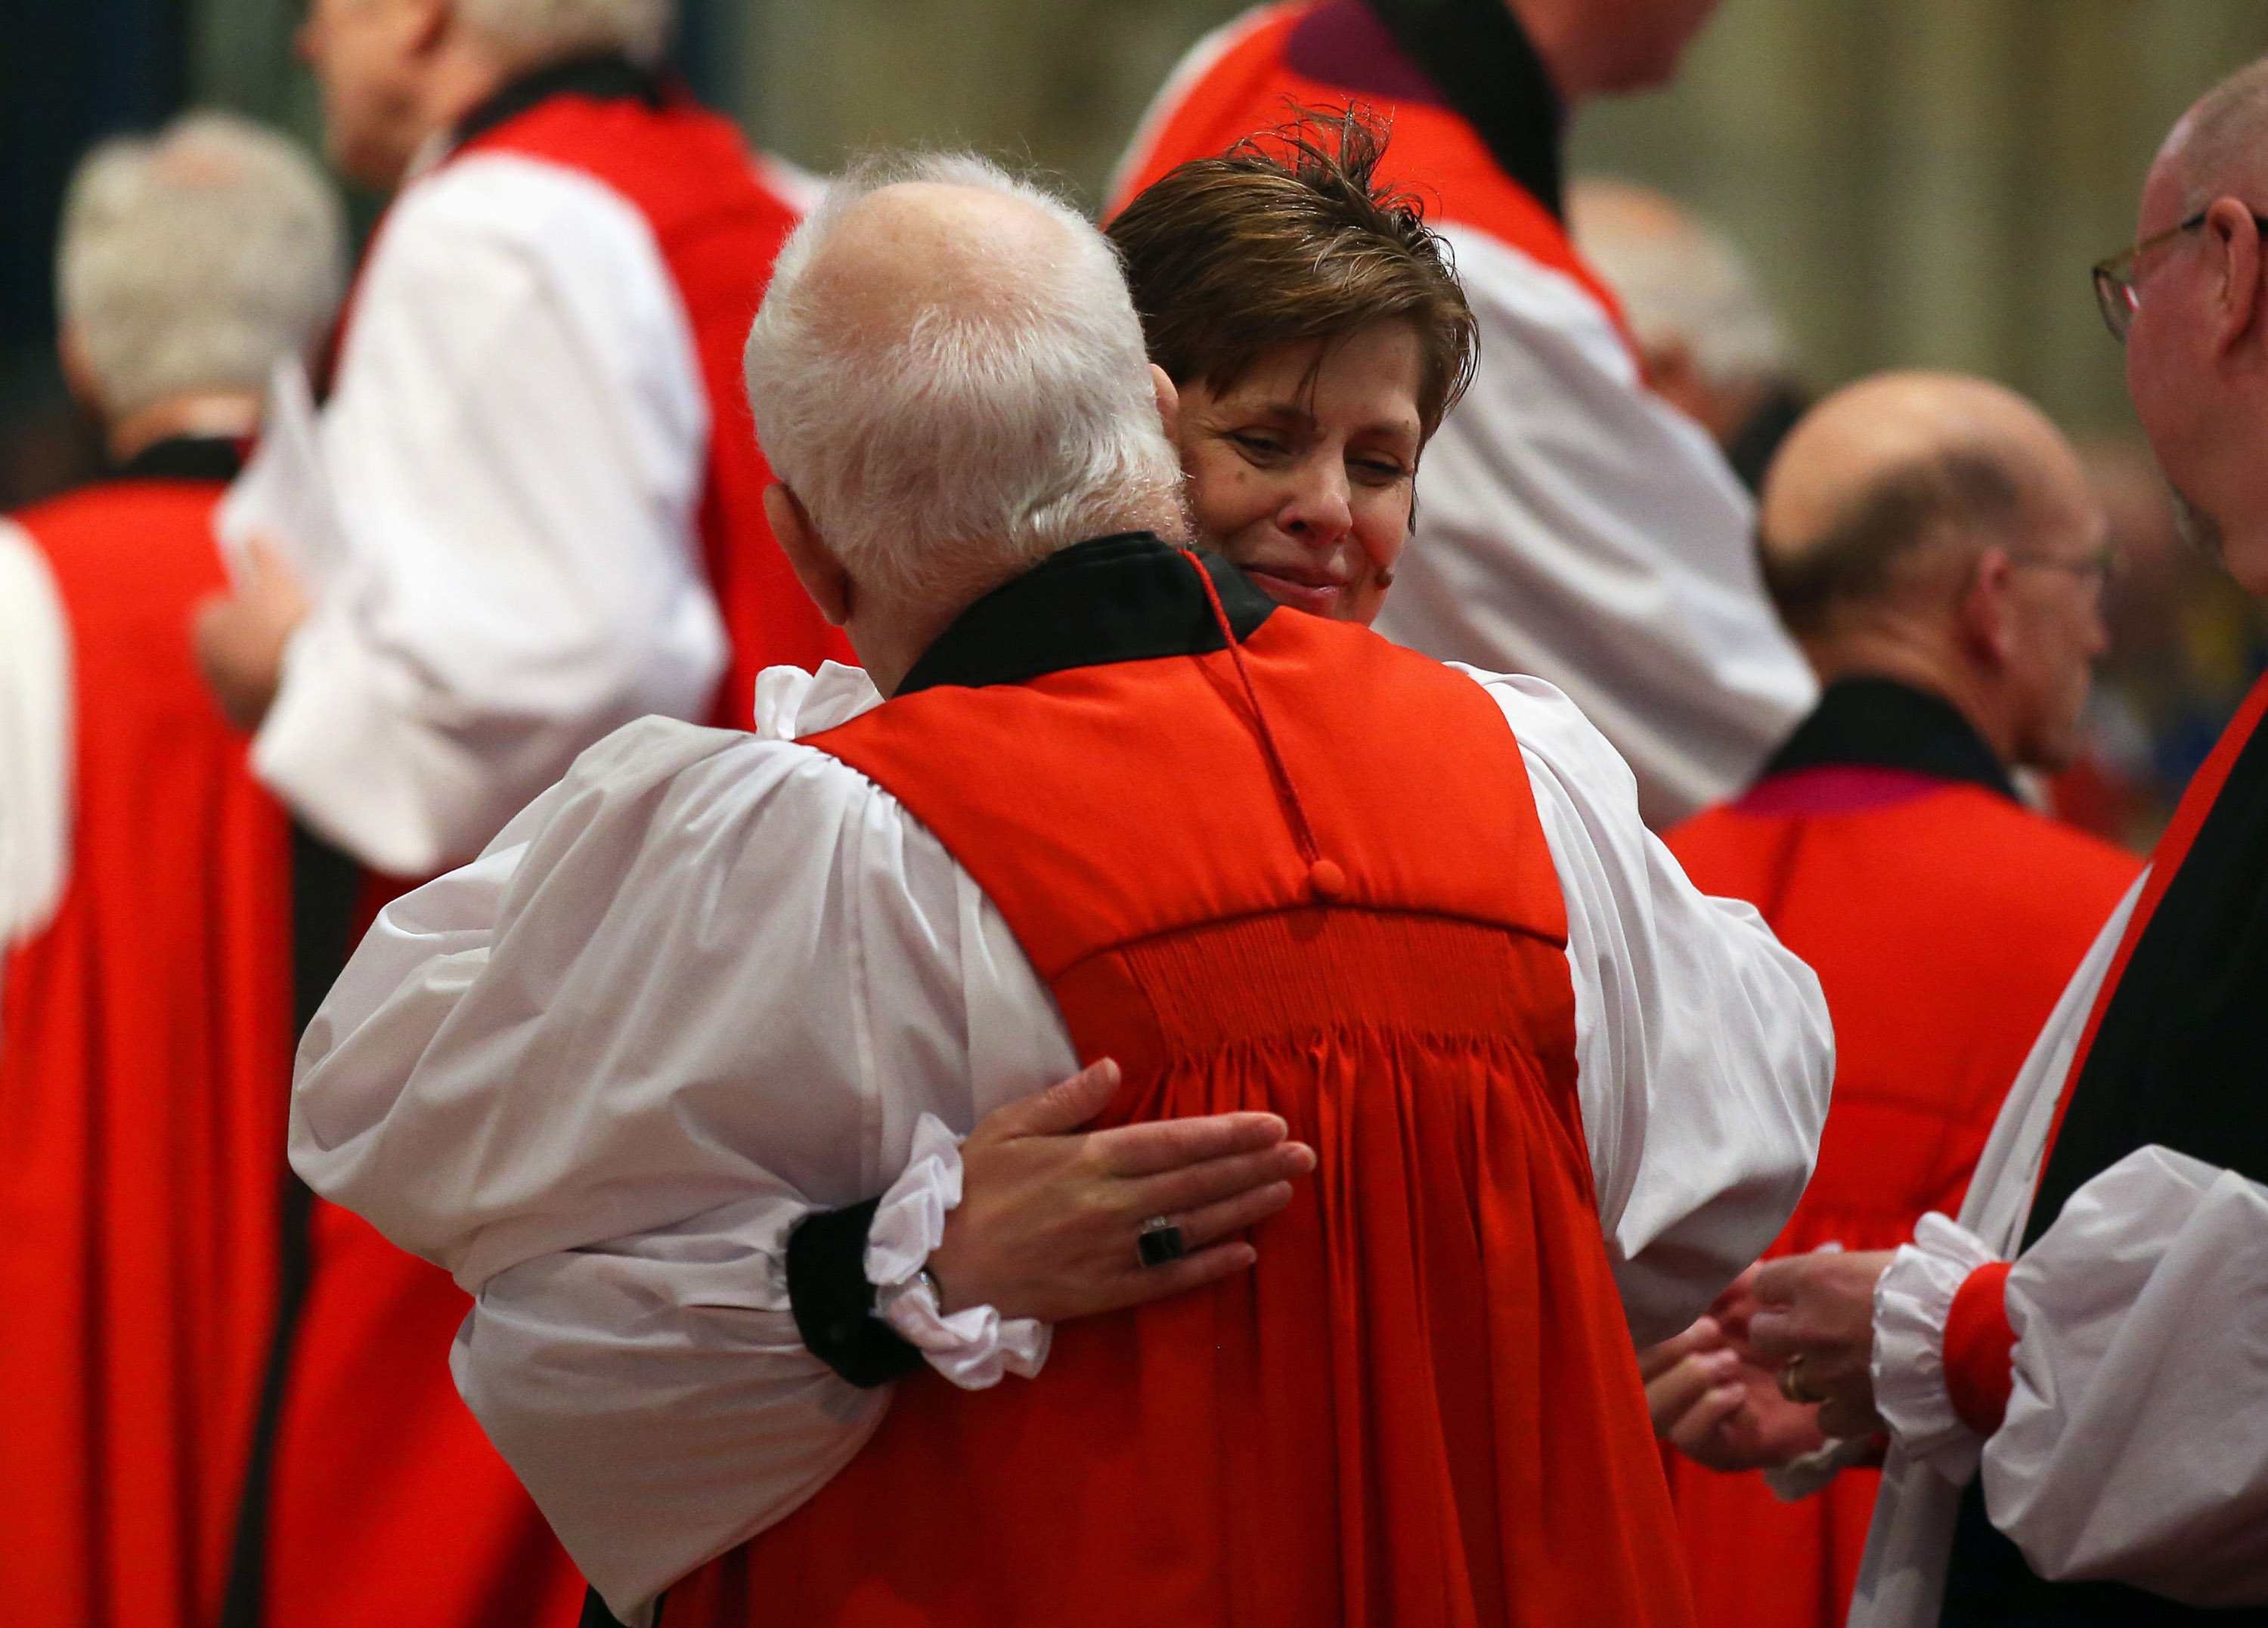 YORK, ENGLAND - JANUARY 26: The Reverend Libby Lane hugs a member of the clergy during a service in which she is consecrated as the eighth Bishop of Stockport at York Minster on January 26, 2